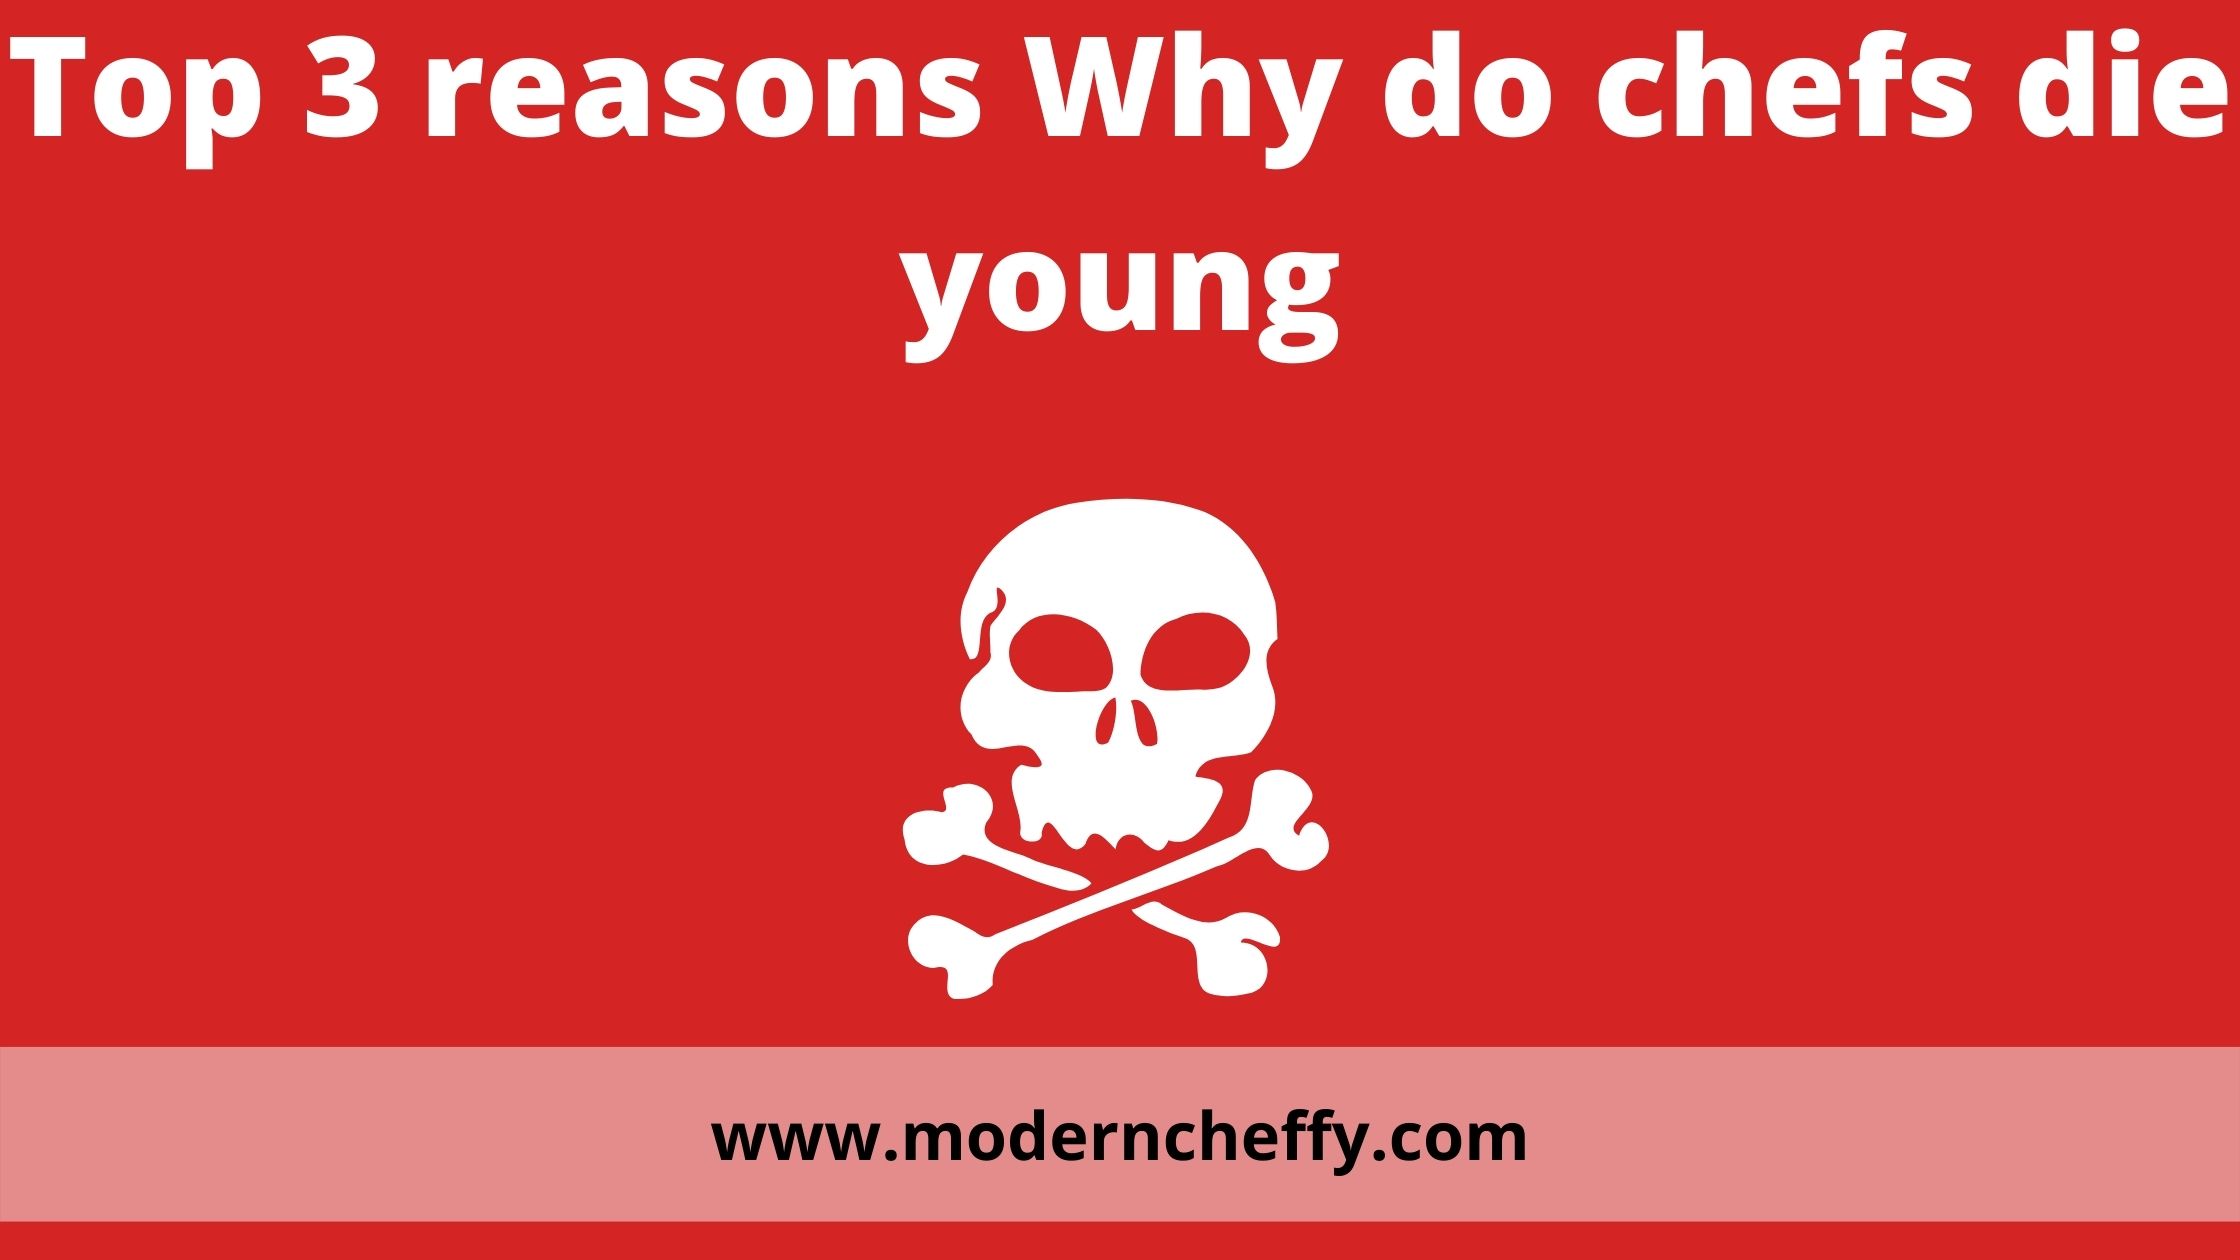 Top 3 reasons Why do chefs die young